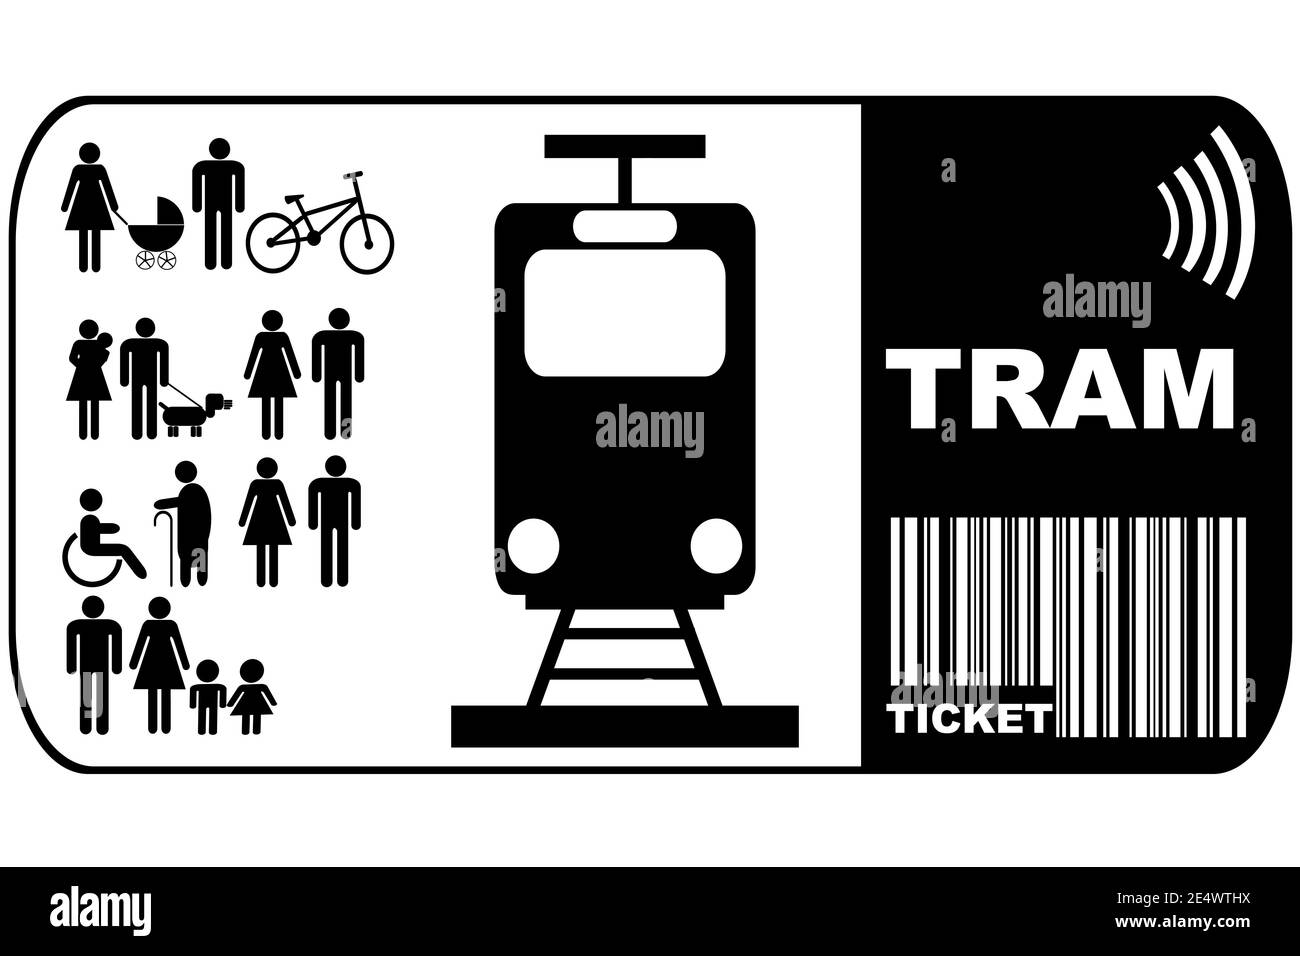 Tram ticket isolated on white background Stock Vector